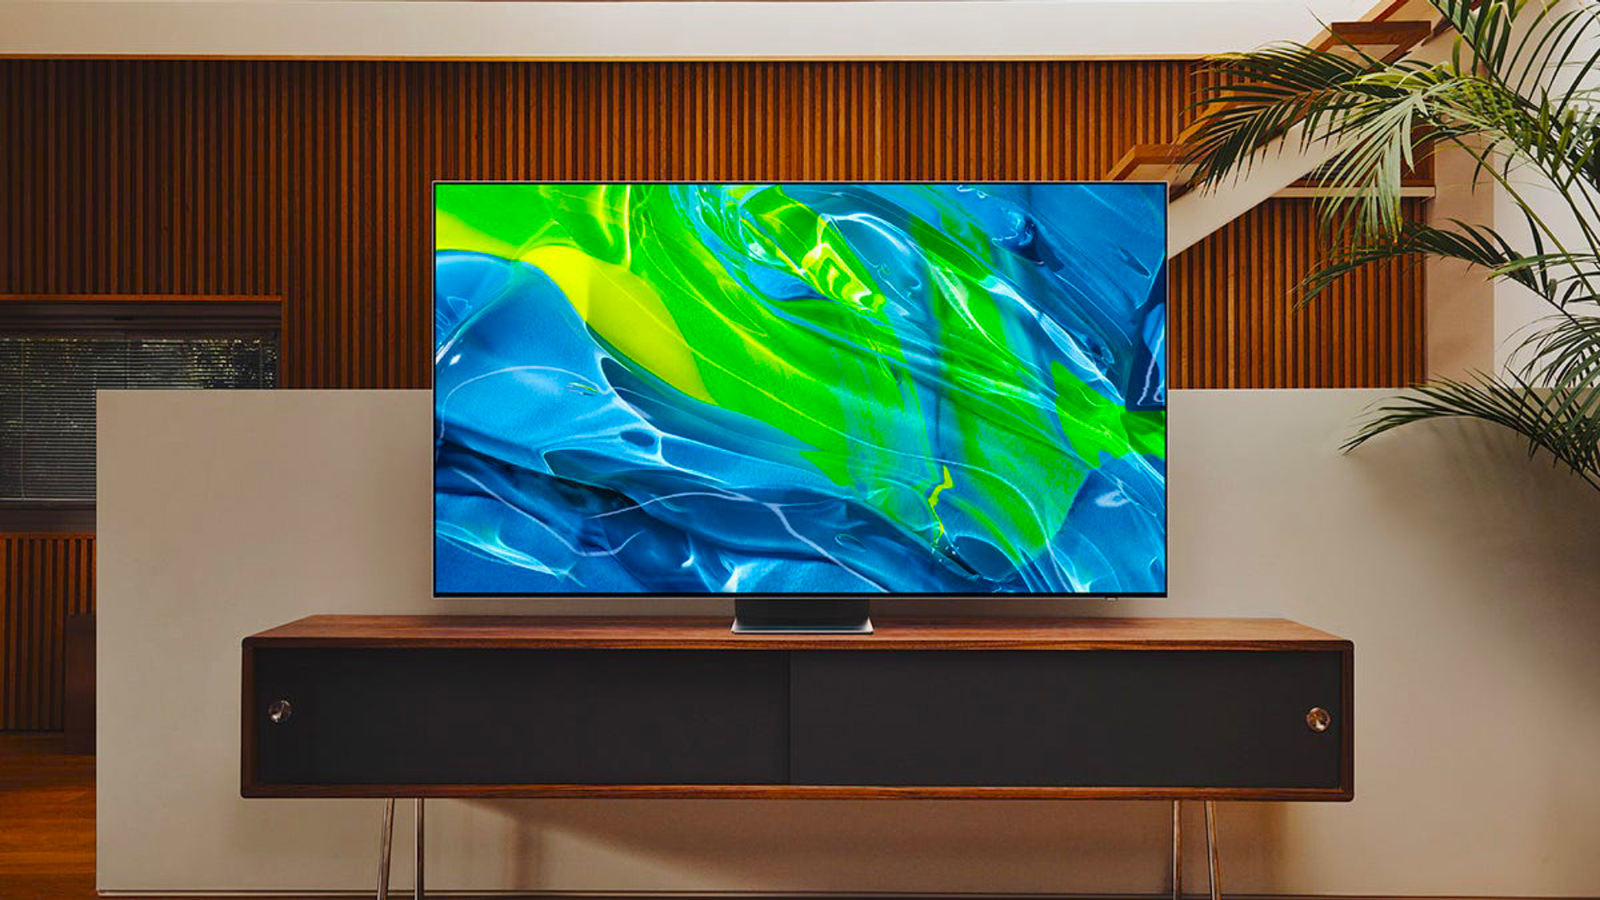 Is OLED burn-in still a problem for gaming? - An image of a Samsung OLED TV